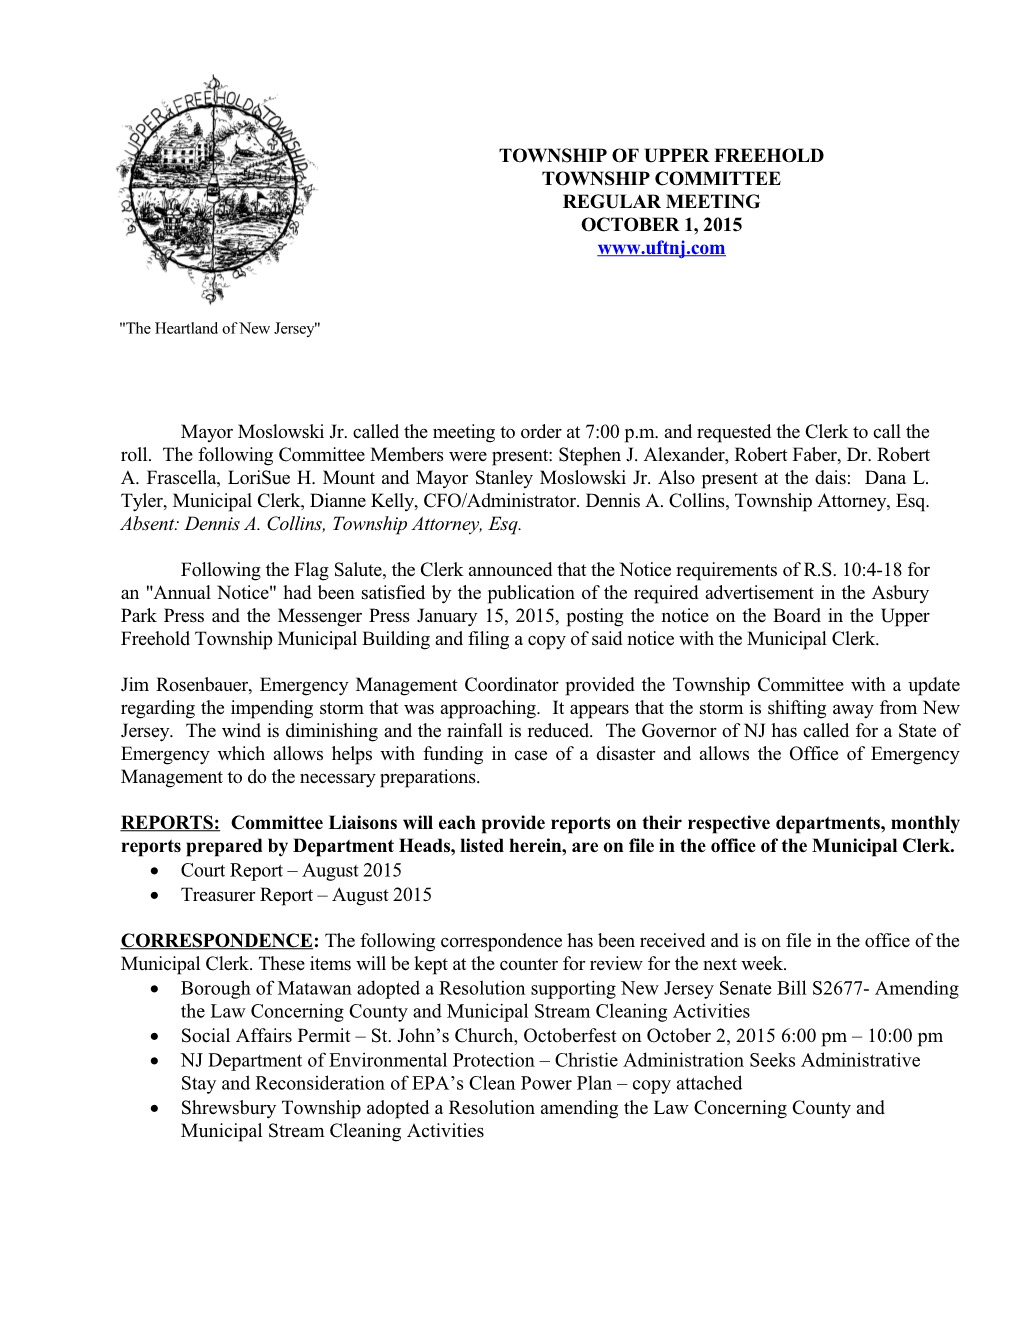 Upper Freehold Township Committee Regular Meeting October 1, 2015